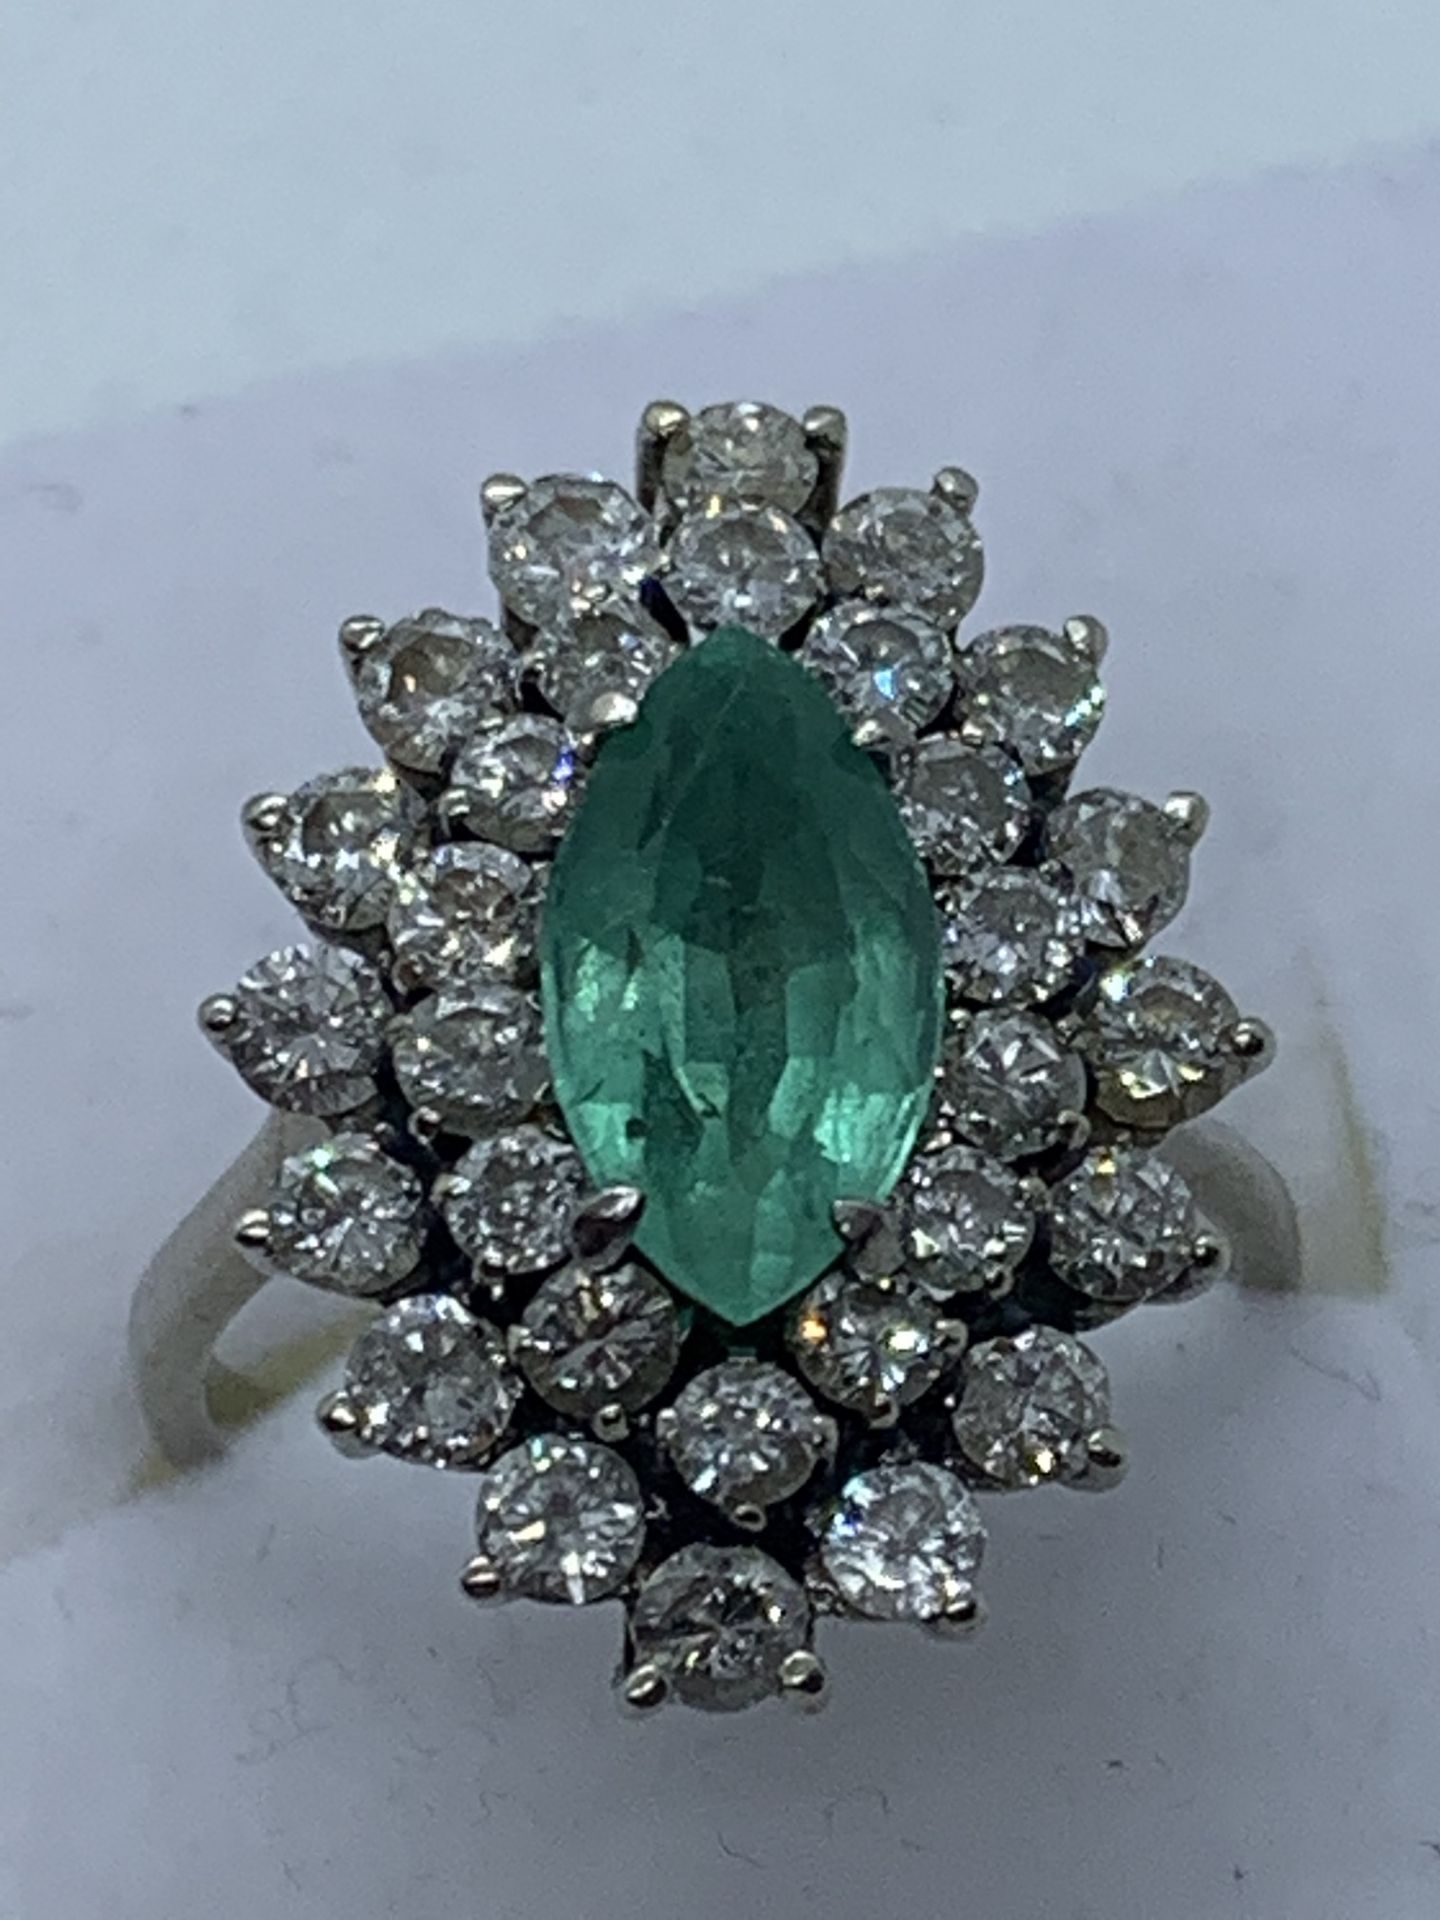 FINE EMERALD & DIAMOND RING SET IN WHITE METAL (TESTED AS WHITE GOLD)